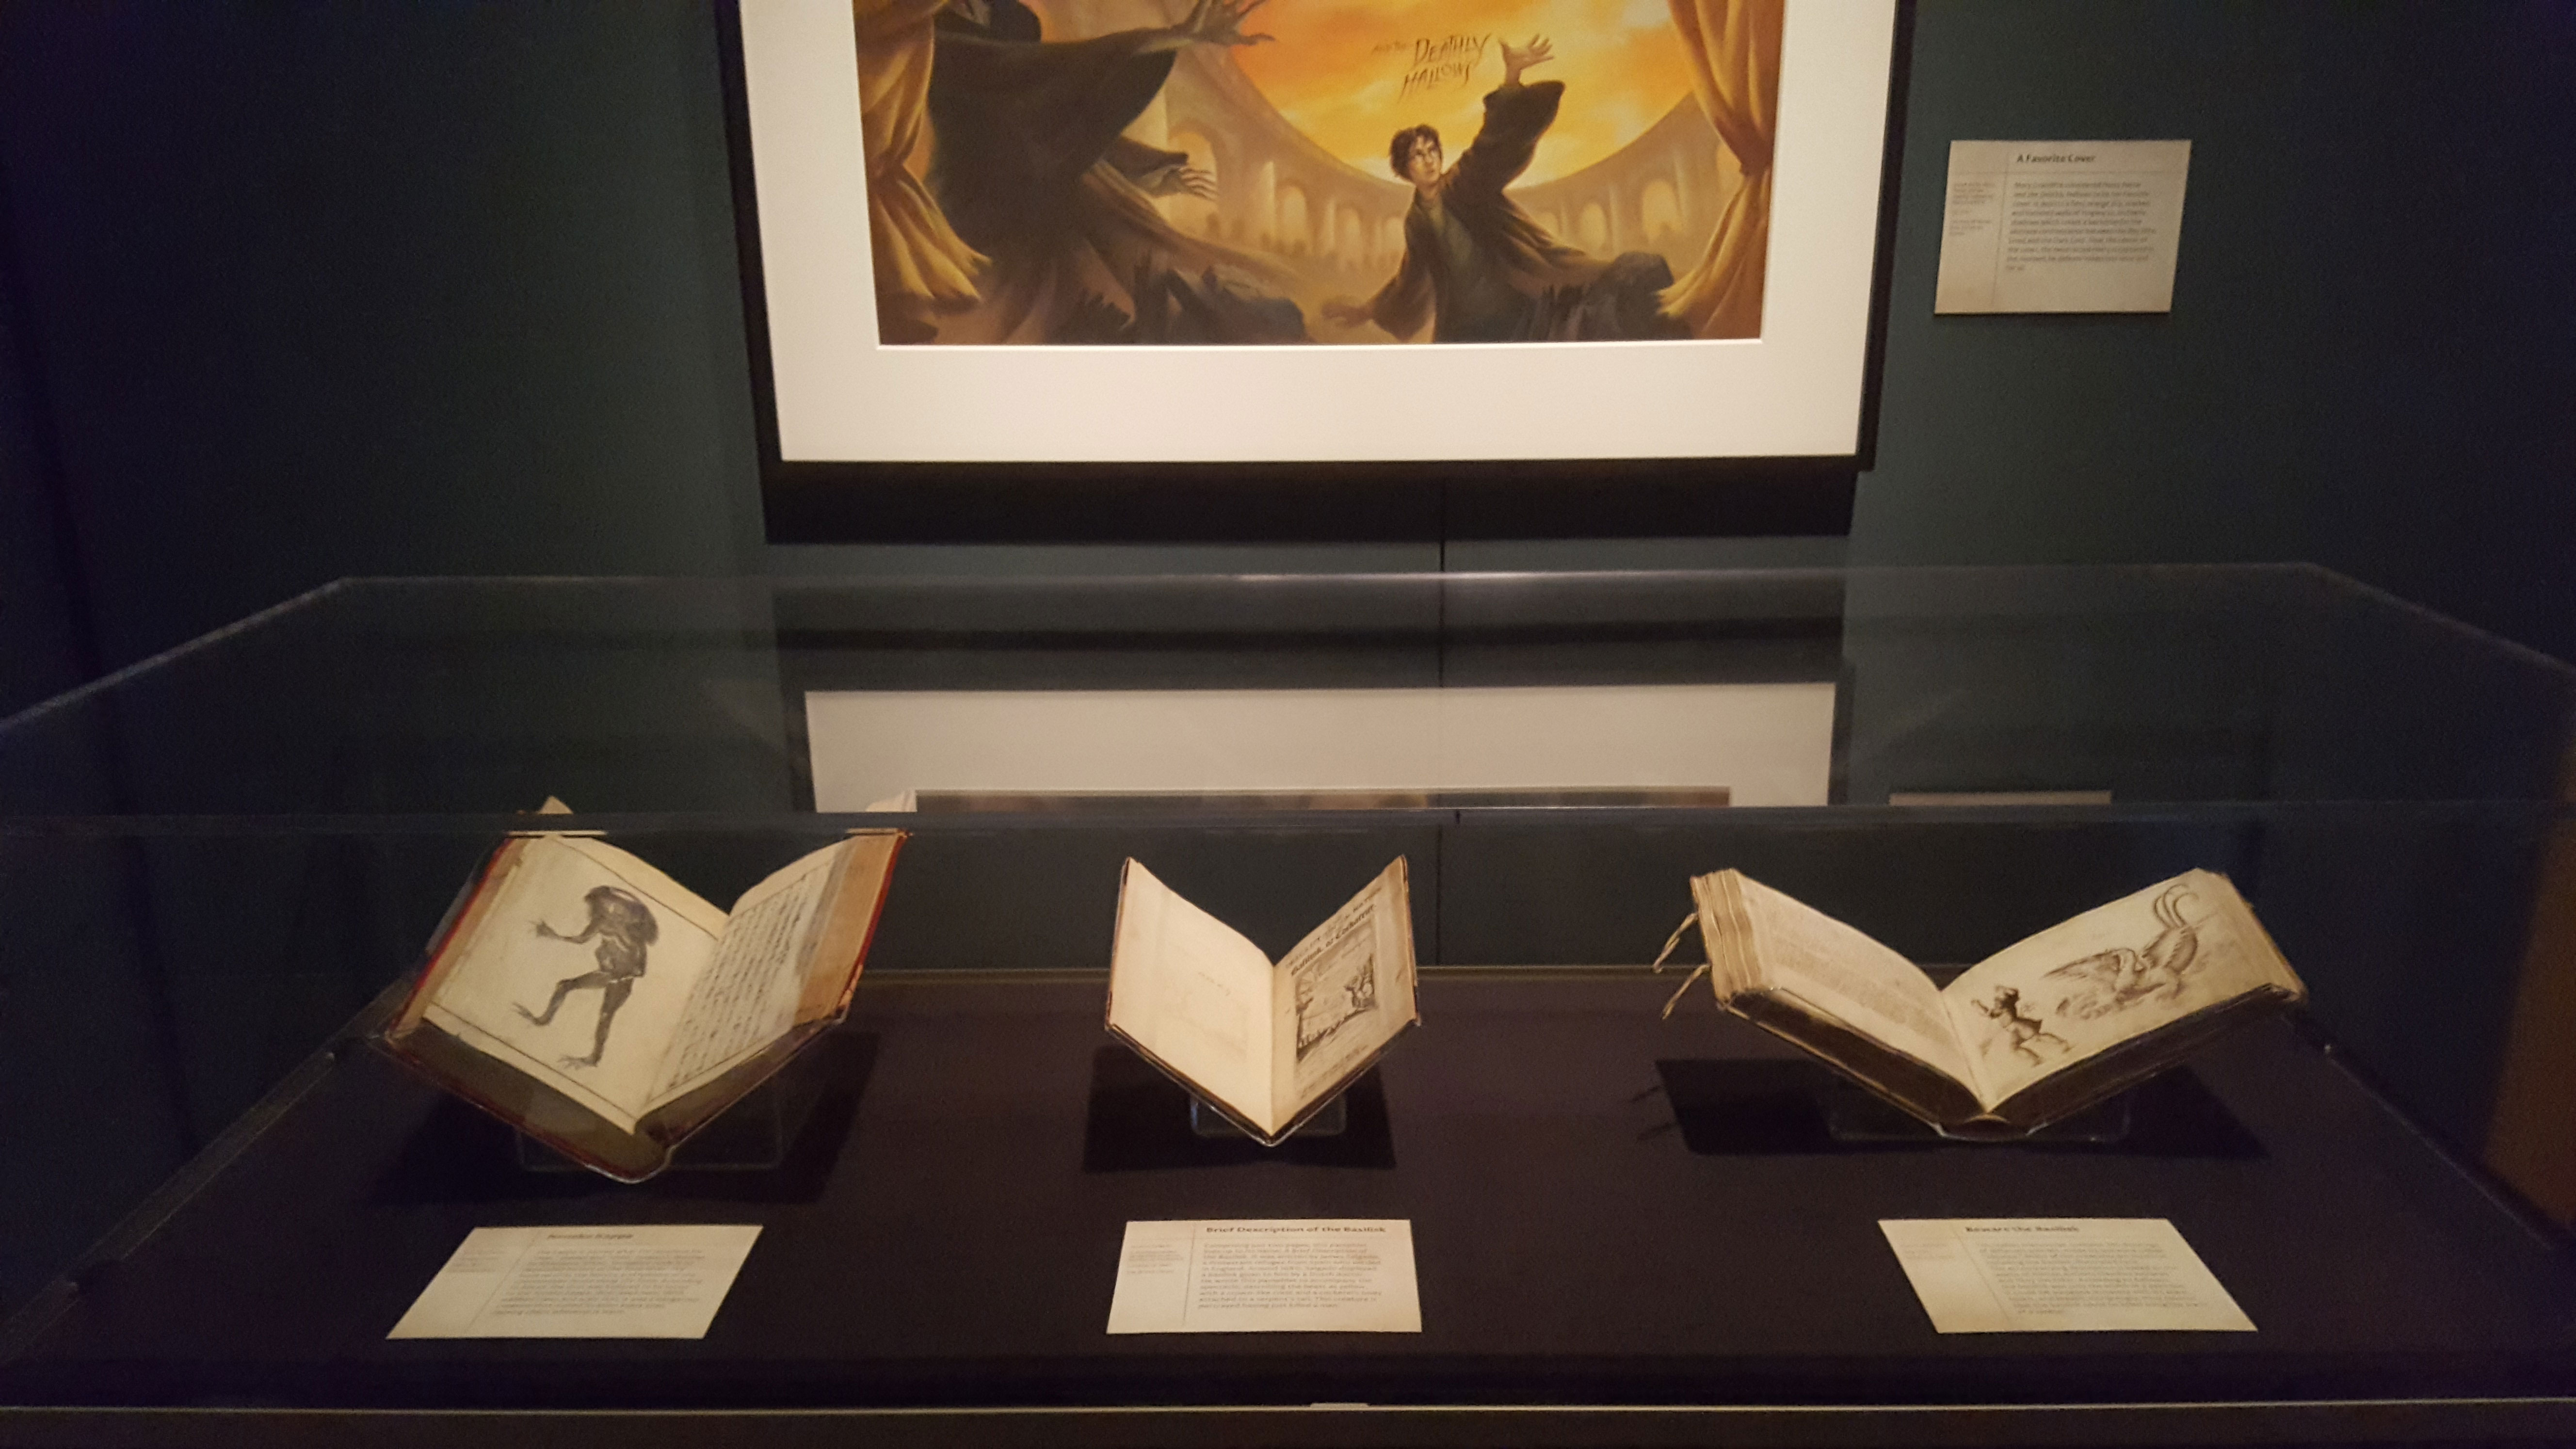 The Defense Against the Dark Arts room in the “Harry Potter: A History of Magic” exhibition